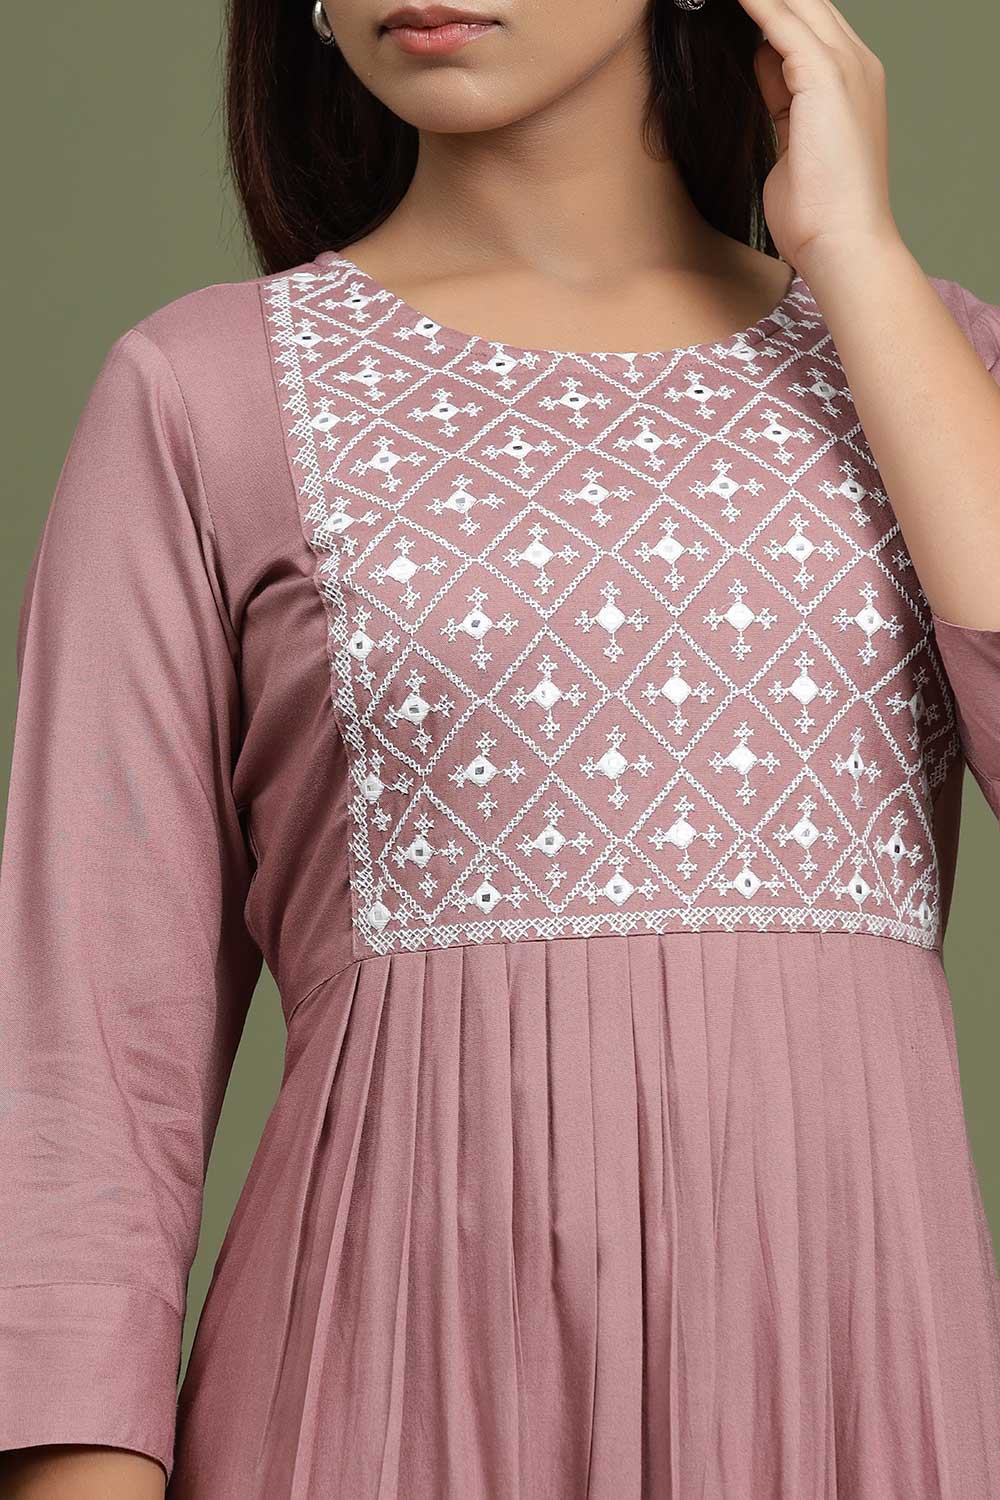 Buy Viscose Rayon Miror Embroidered Dress in Light Purple Online - Side